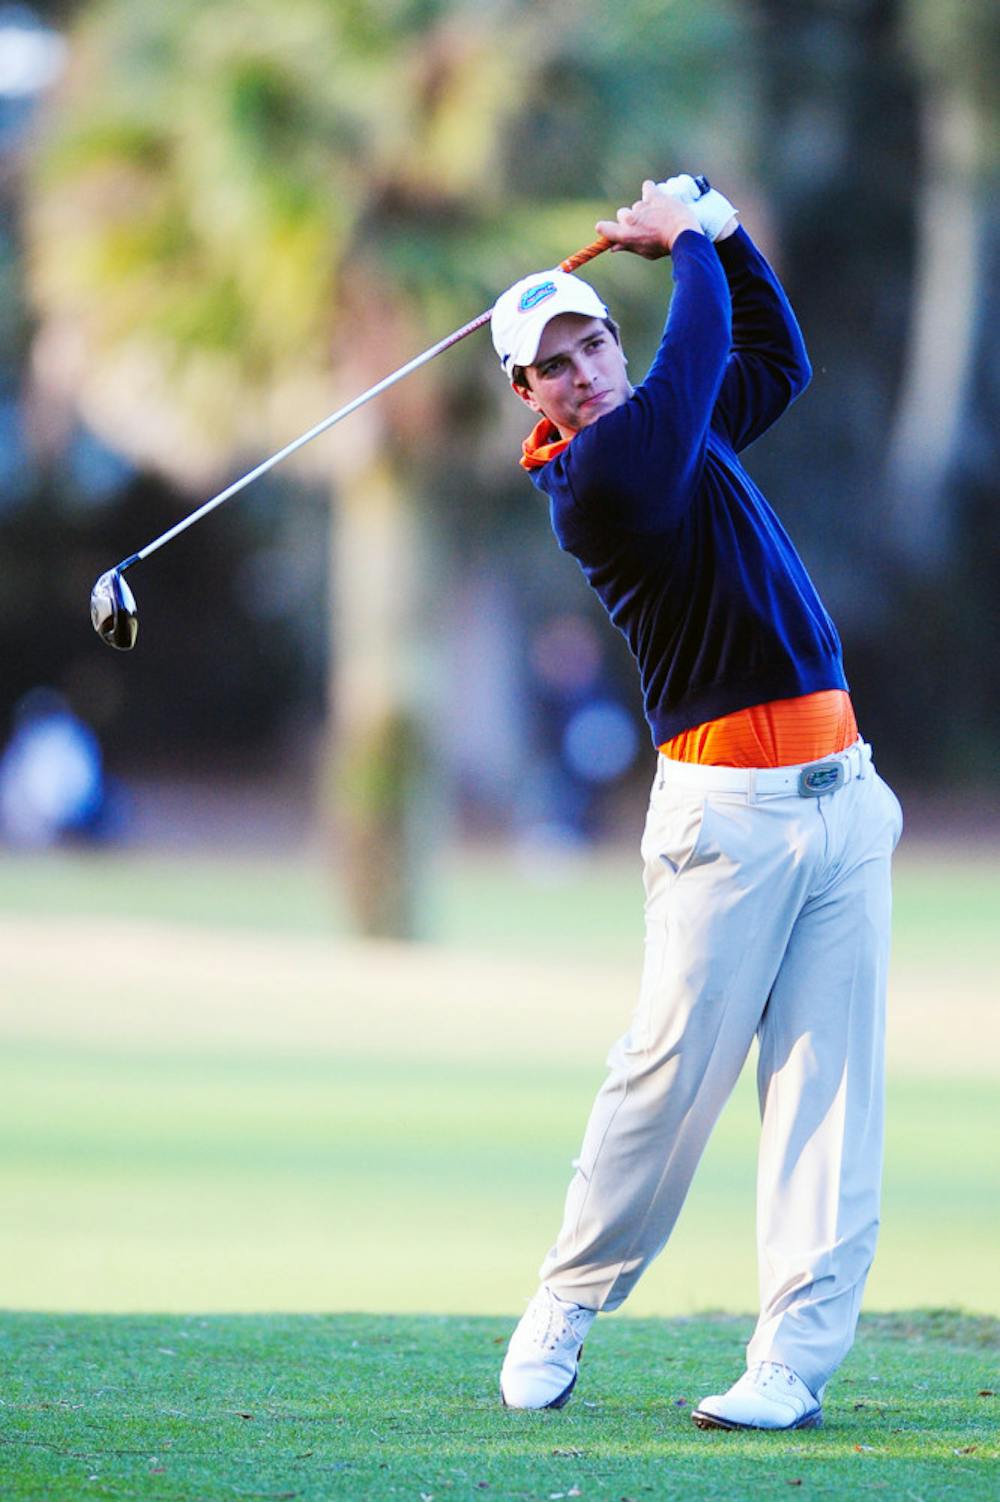 <p>Santiago Gavino hits the ball during the SunTrust Gator Invitational on Saturday at the Mark Bostick Golf Course. Gavino totaled a score of 232 (+16) as an individual competitor at the Chris Schenkel Invitational last weekend. </p>